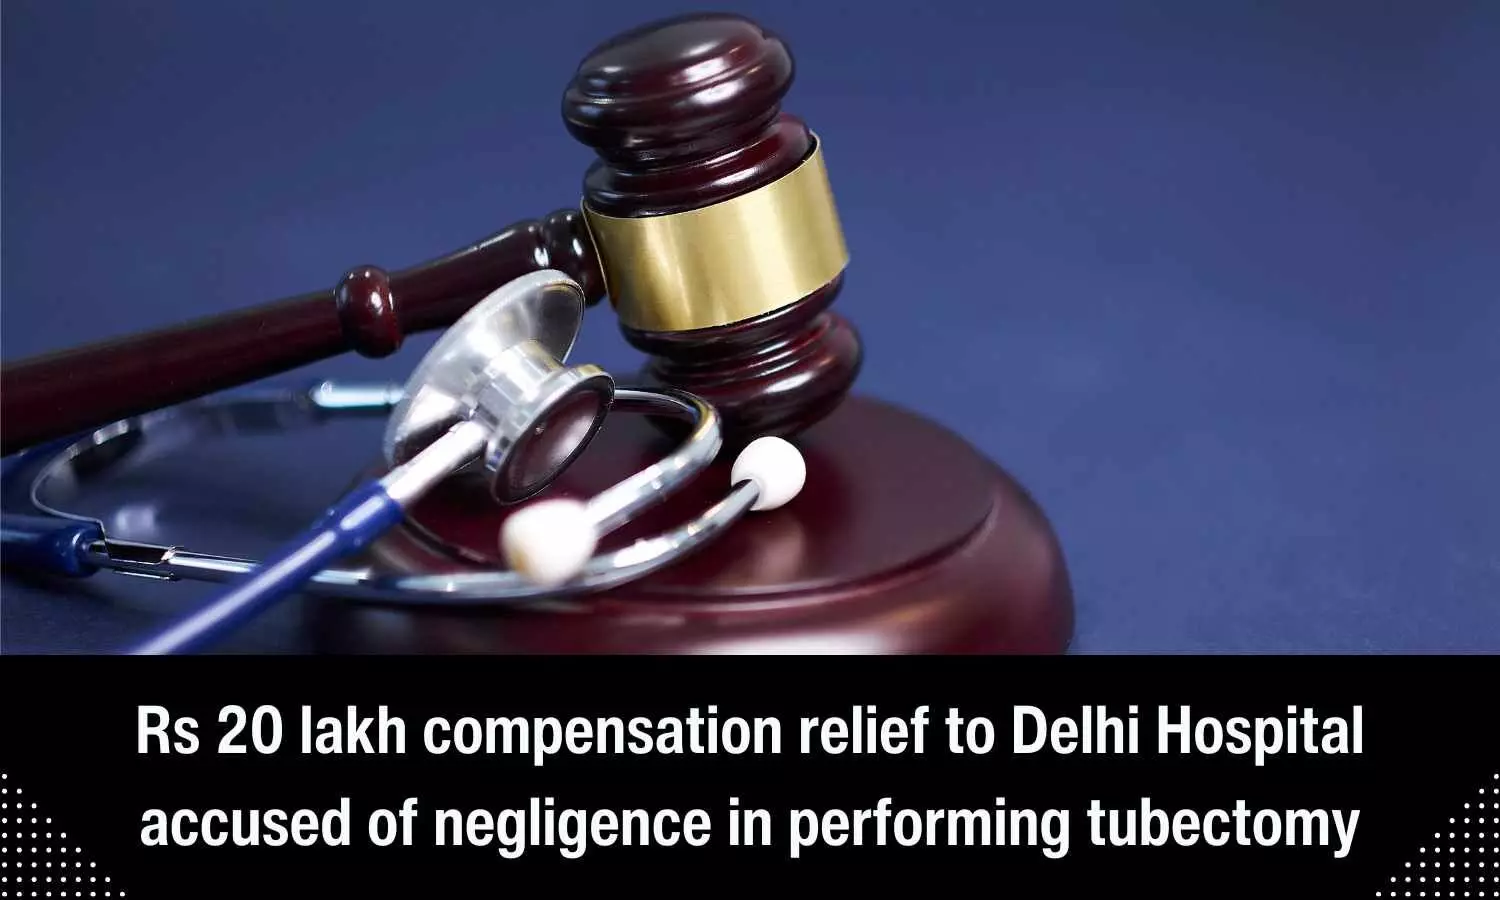 Rs 20 lakh compensation relief to Delhi Hospital accused of negligence in performing tubectomy